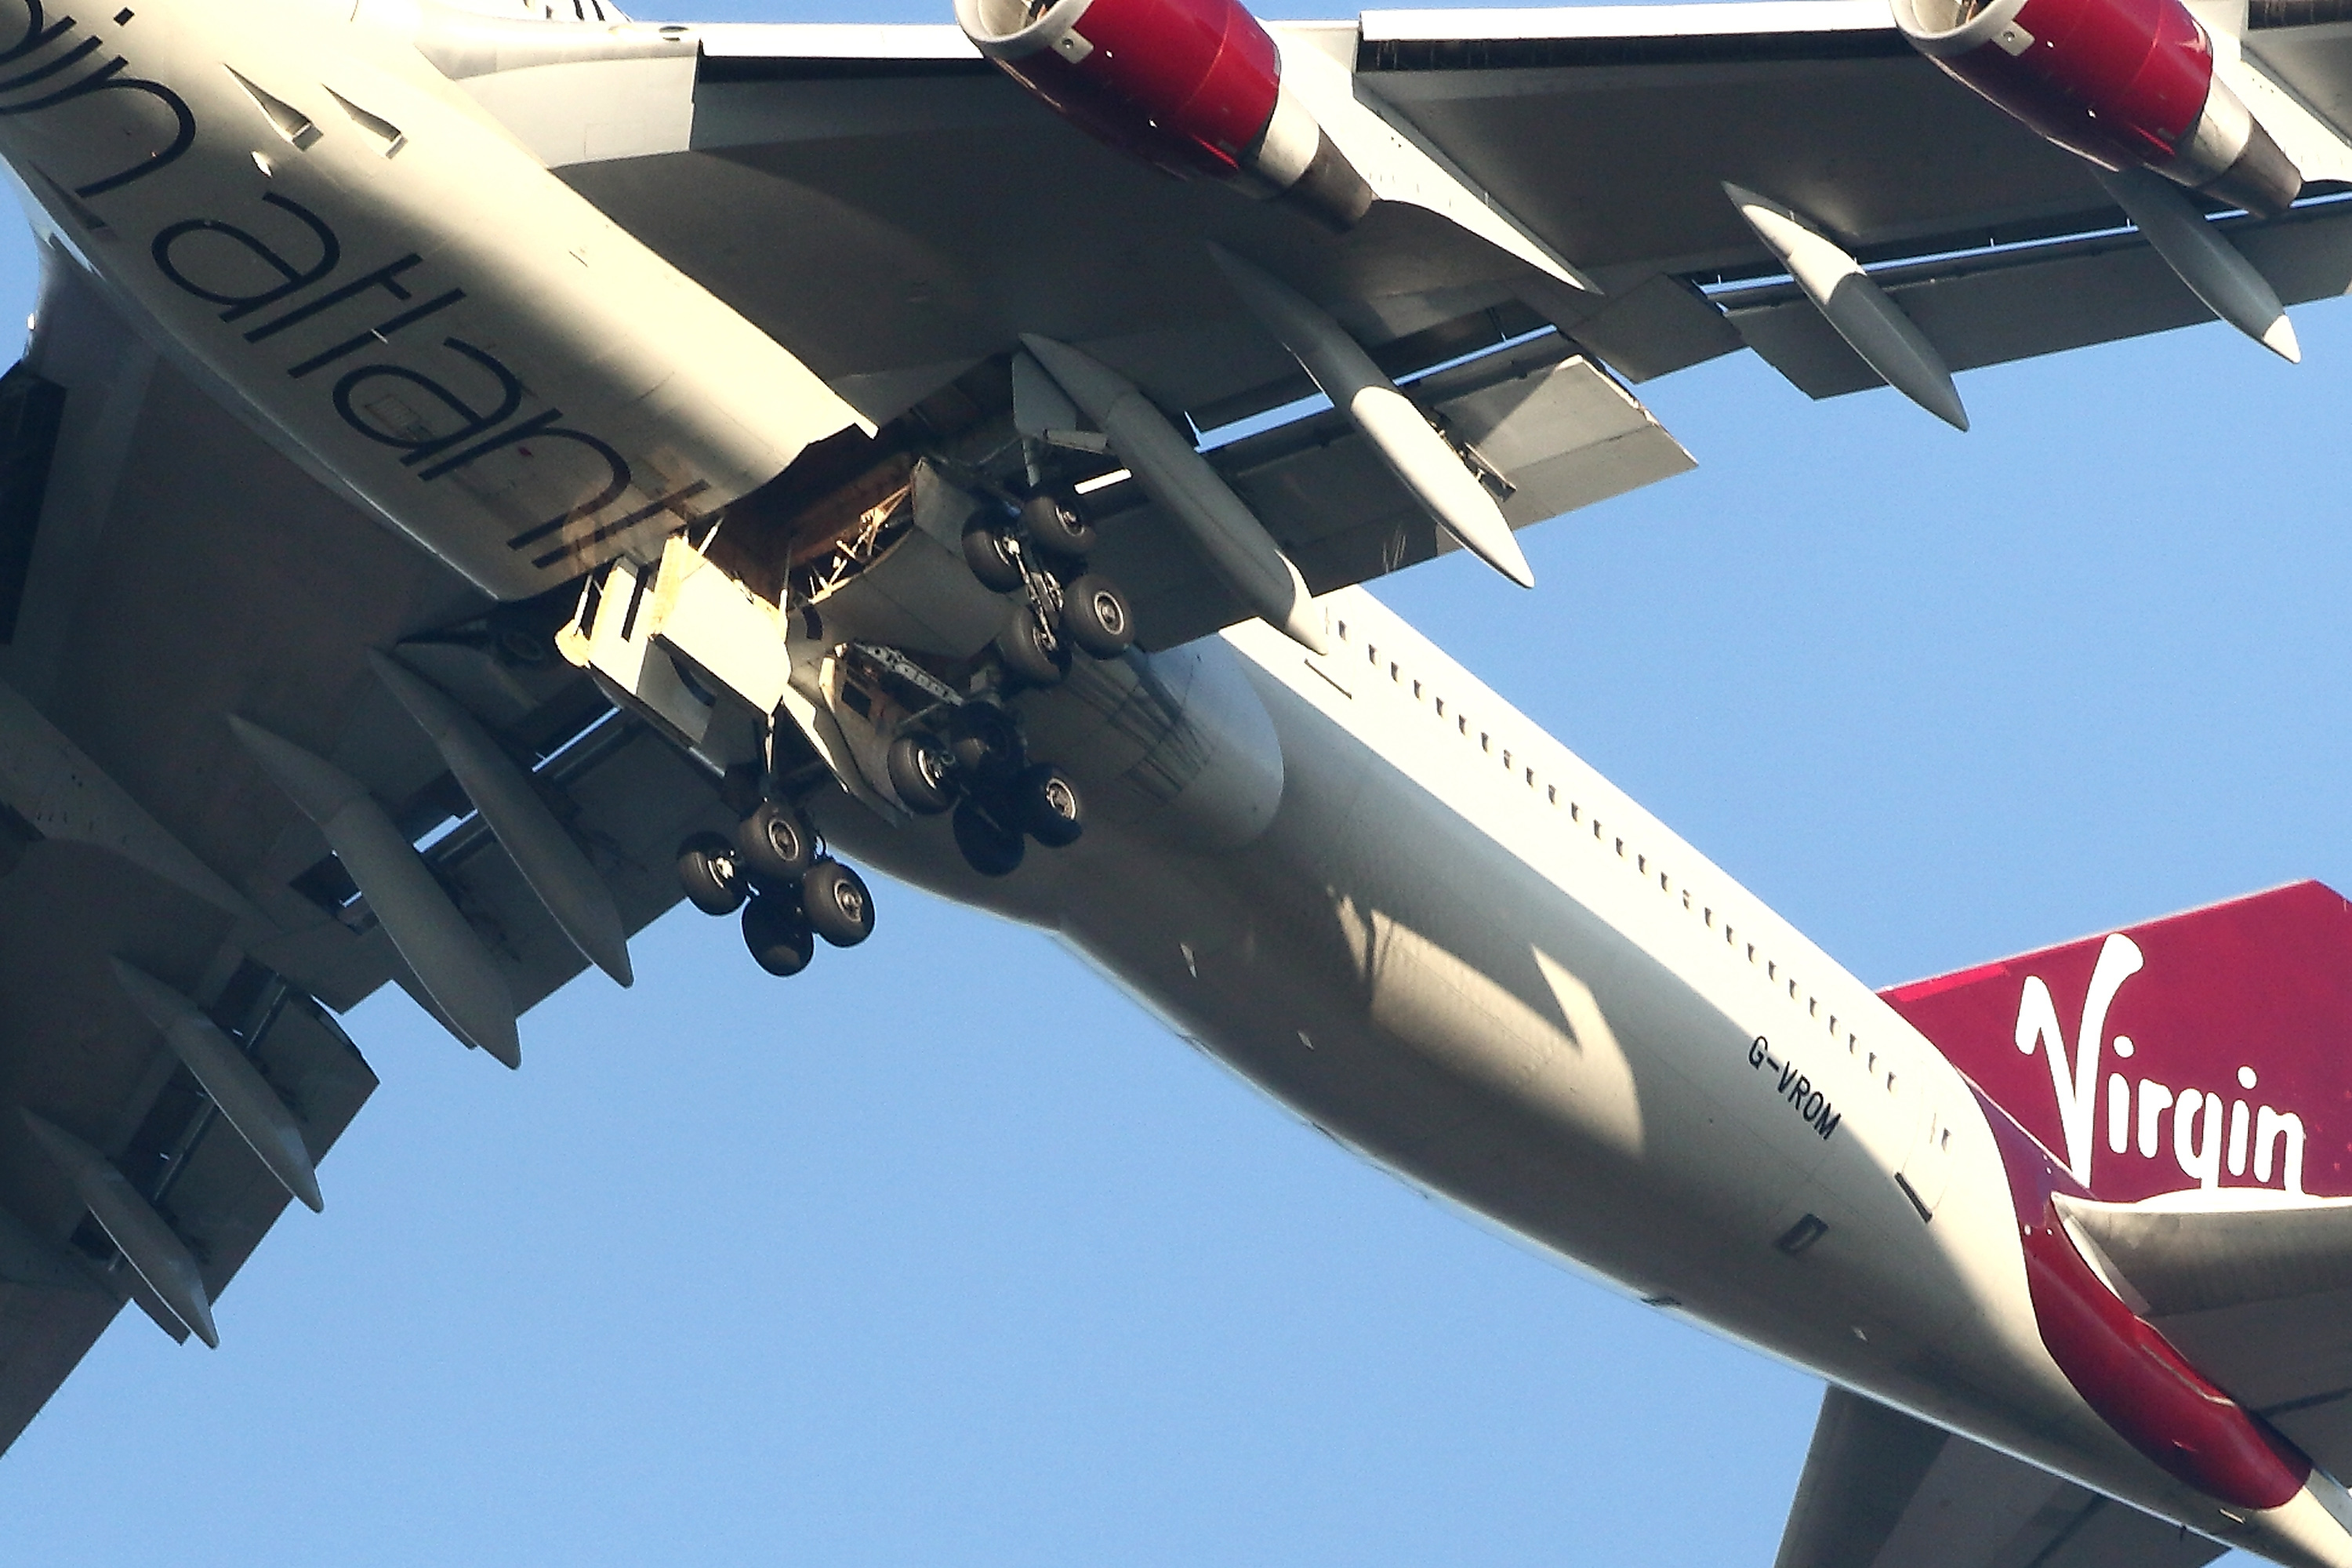 A detailed view of the undercarriage of the Virgin Atlantic Boeing 747 as it passes overhead at Gatwick airport in West Sussex on December 29, 2014 in London, England. (Jordan Mansfield—Getty Images)